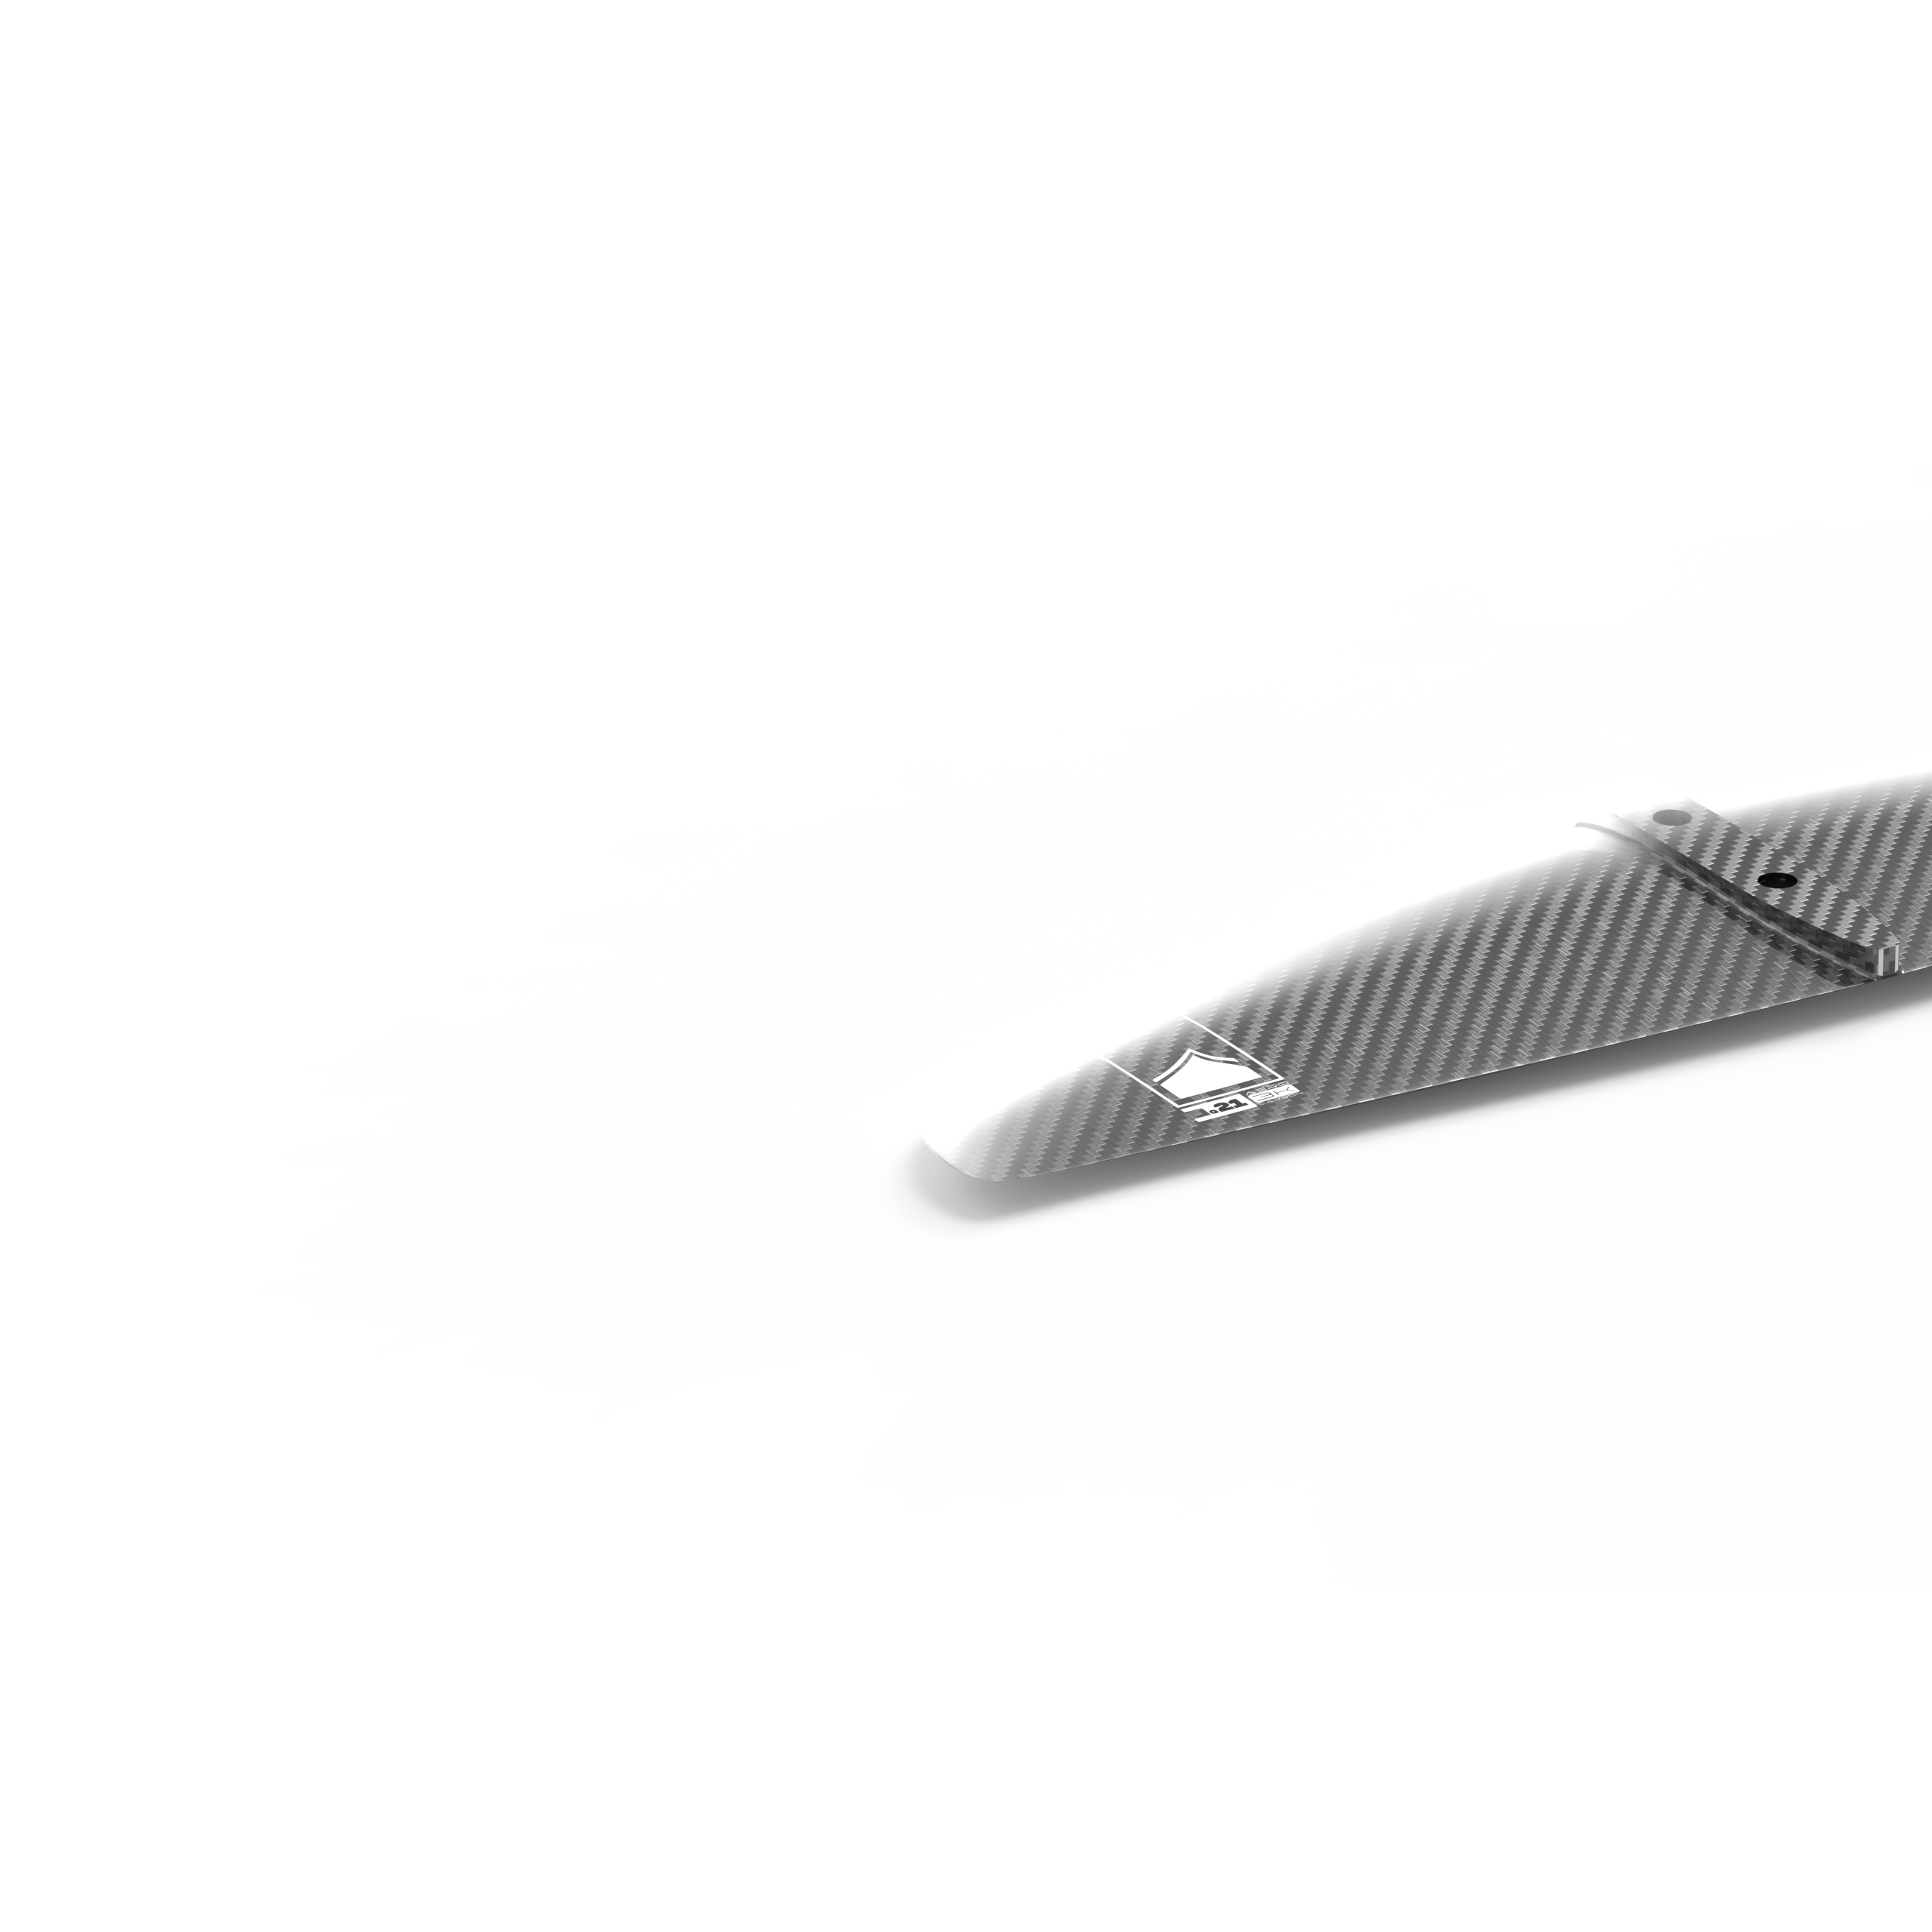 A Liquid Force 2024 G21 Rear Wing on a white surface demonstrating its stability.